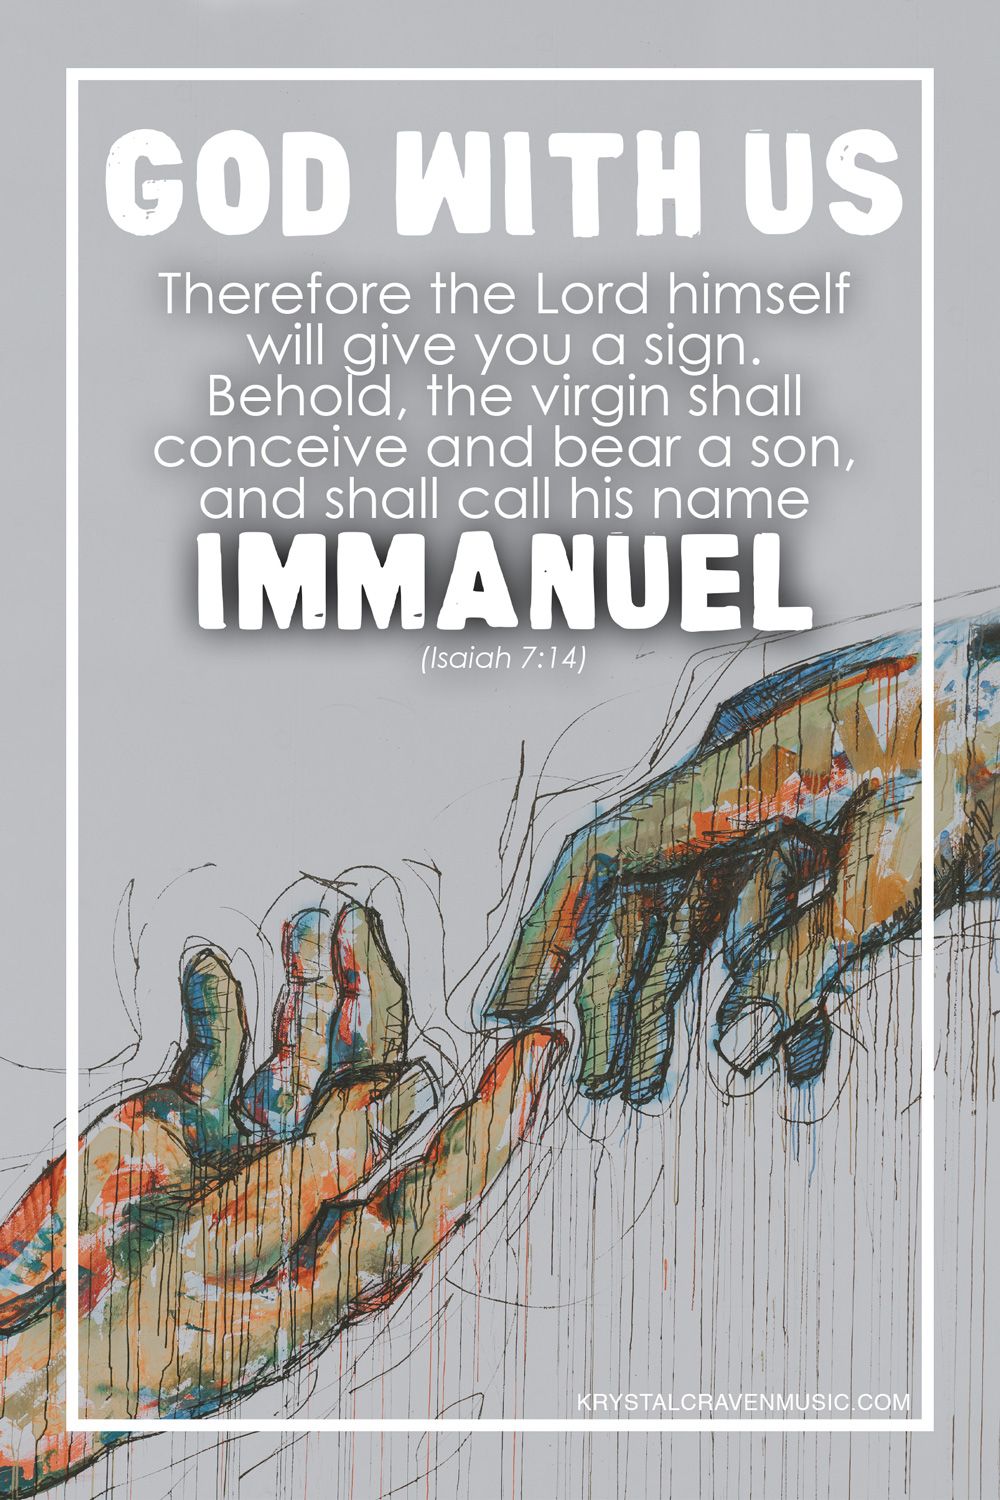 Devotional title text of "God With Us" and the Bible verse Isaiah 7:14 "Therefore the Lord himself will give you a sign. Behold, the virgin shall conceive and bear a son, and shall call his name Immanuel". All text is overlaying a multicolored watercolor of two hands reaching towards each other and the pointer fingers touching.